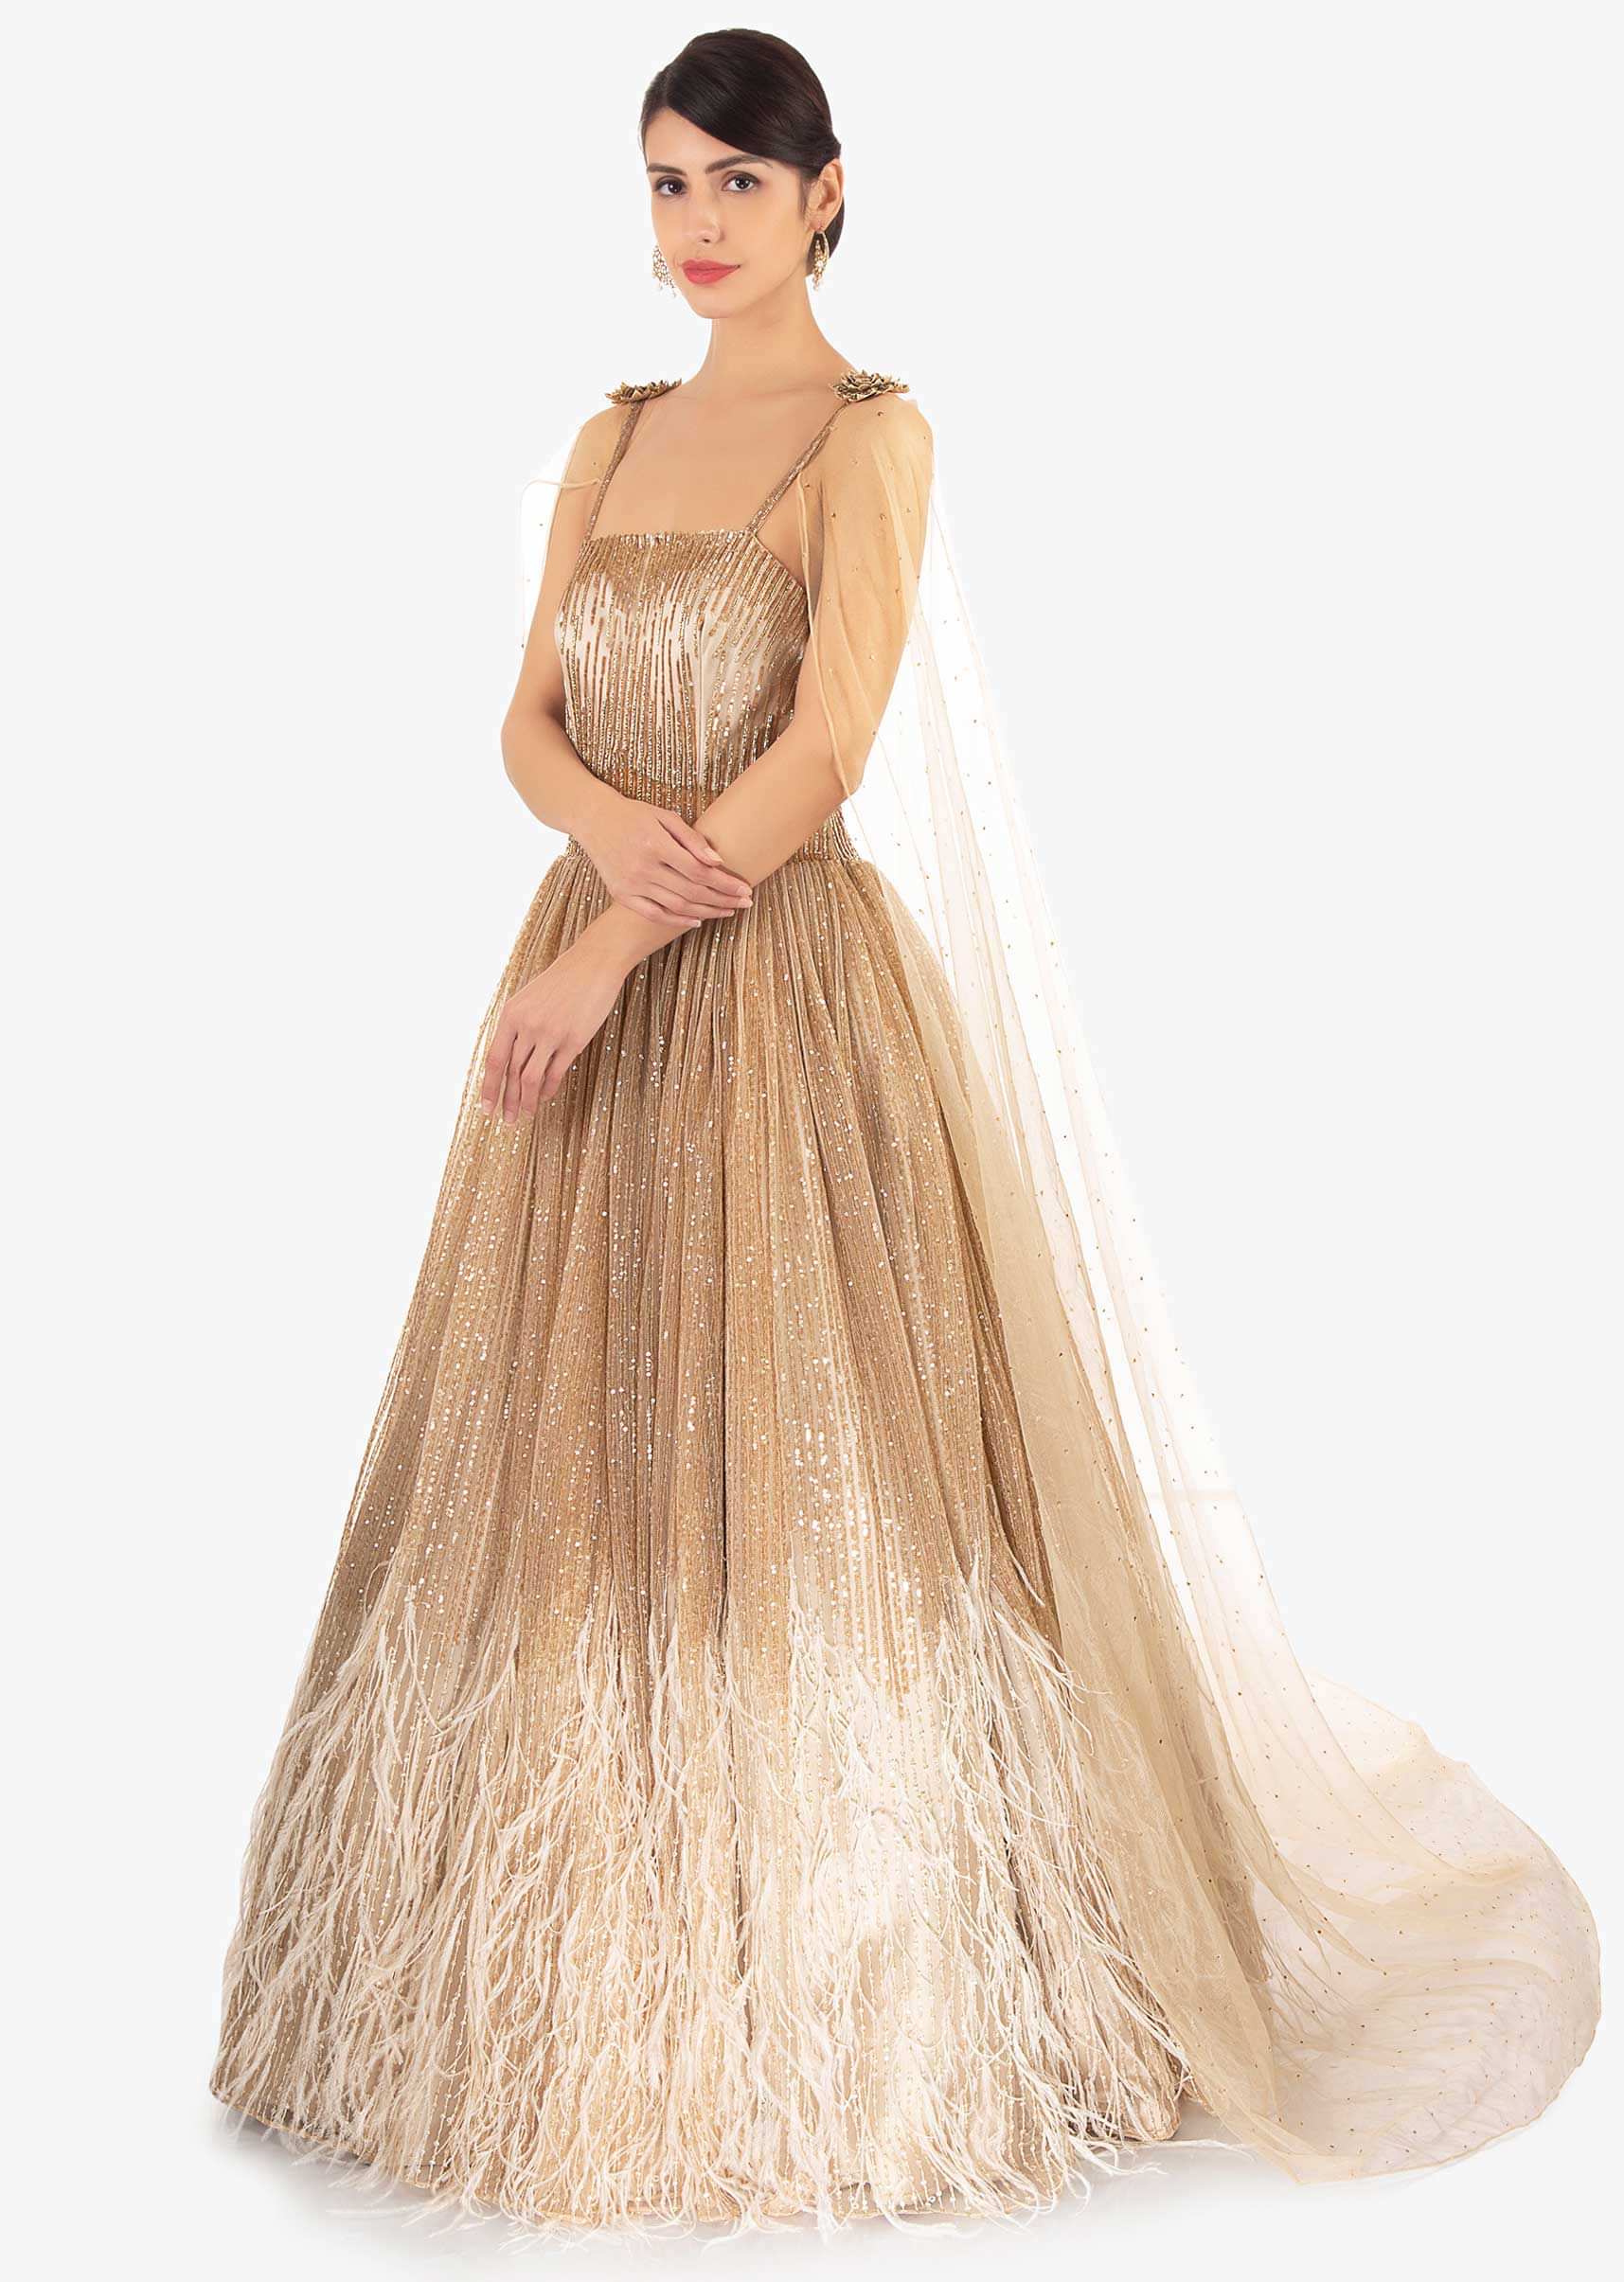 Shimmer sequins  gown in 3 D flowers, feathers and  fancy cape